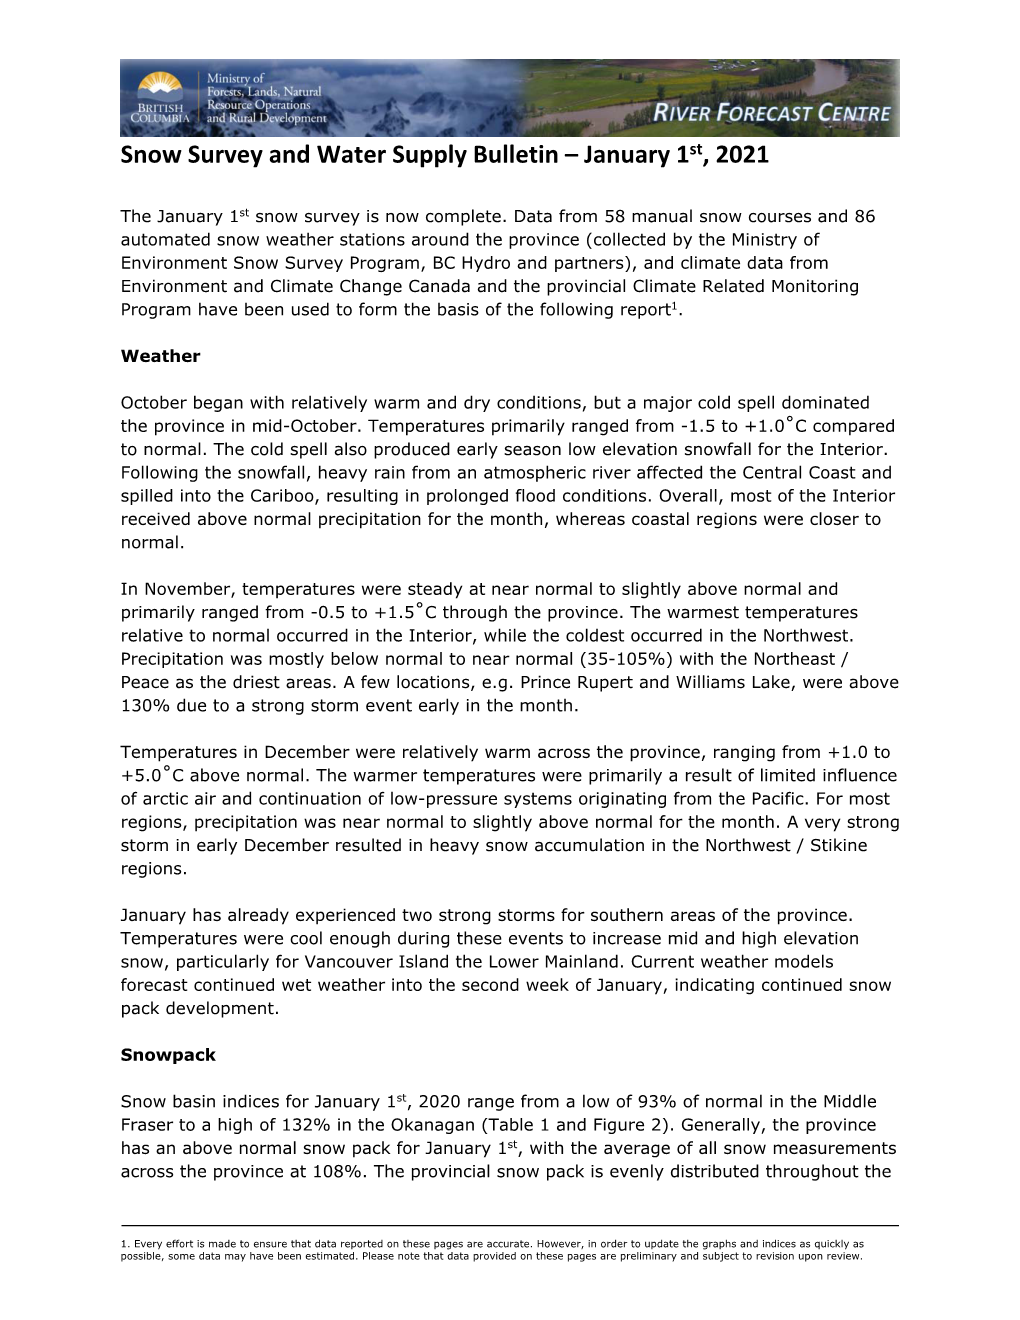 Snow Survey and Water Supply Bulletin – January 1St, 2021